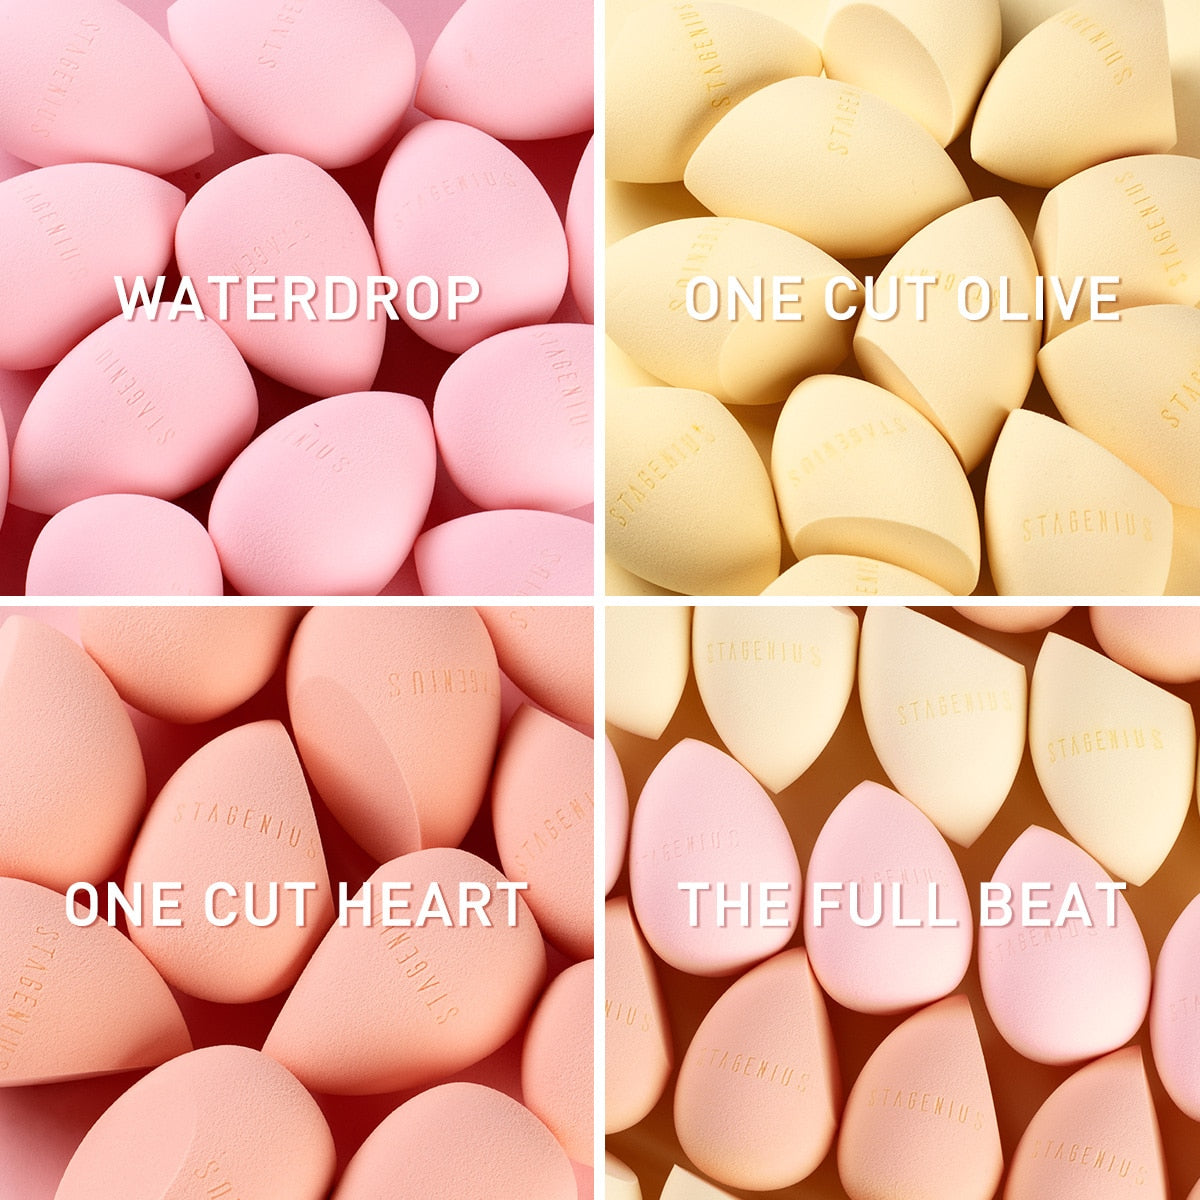 Multifuctional Cosmetic Puff Makeup Sponge For Foundation Powder Sponge Beauty Makeup Tool Accessories